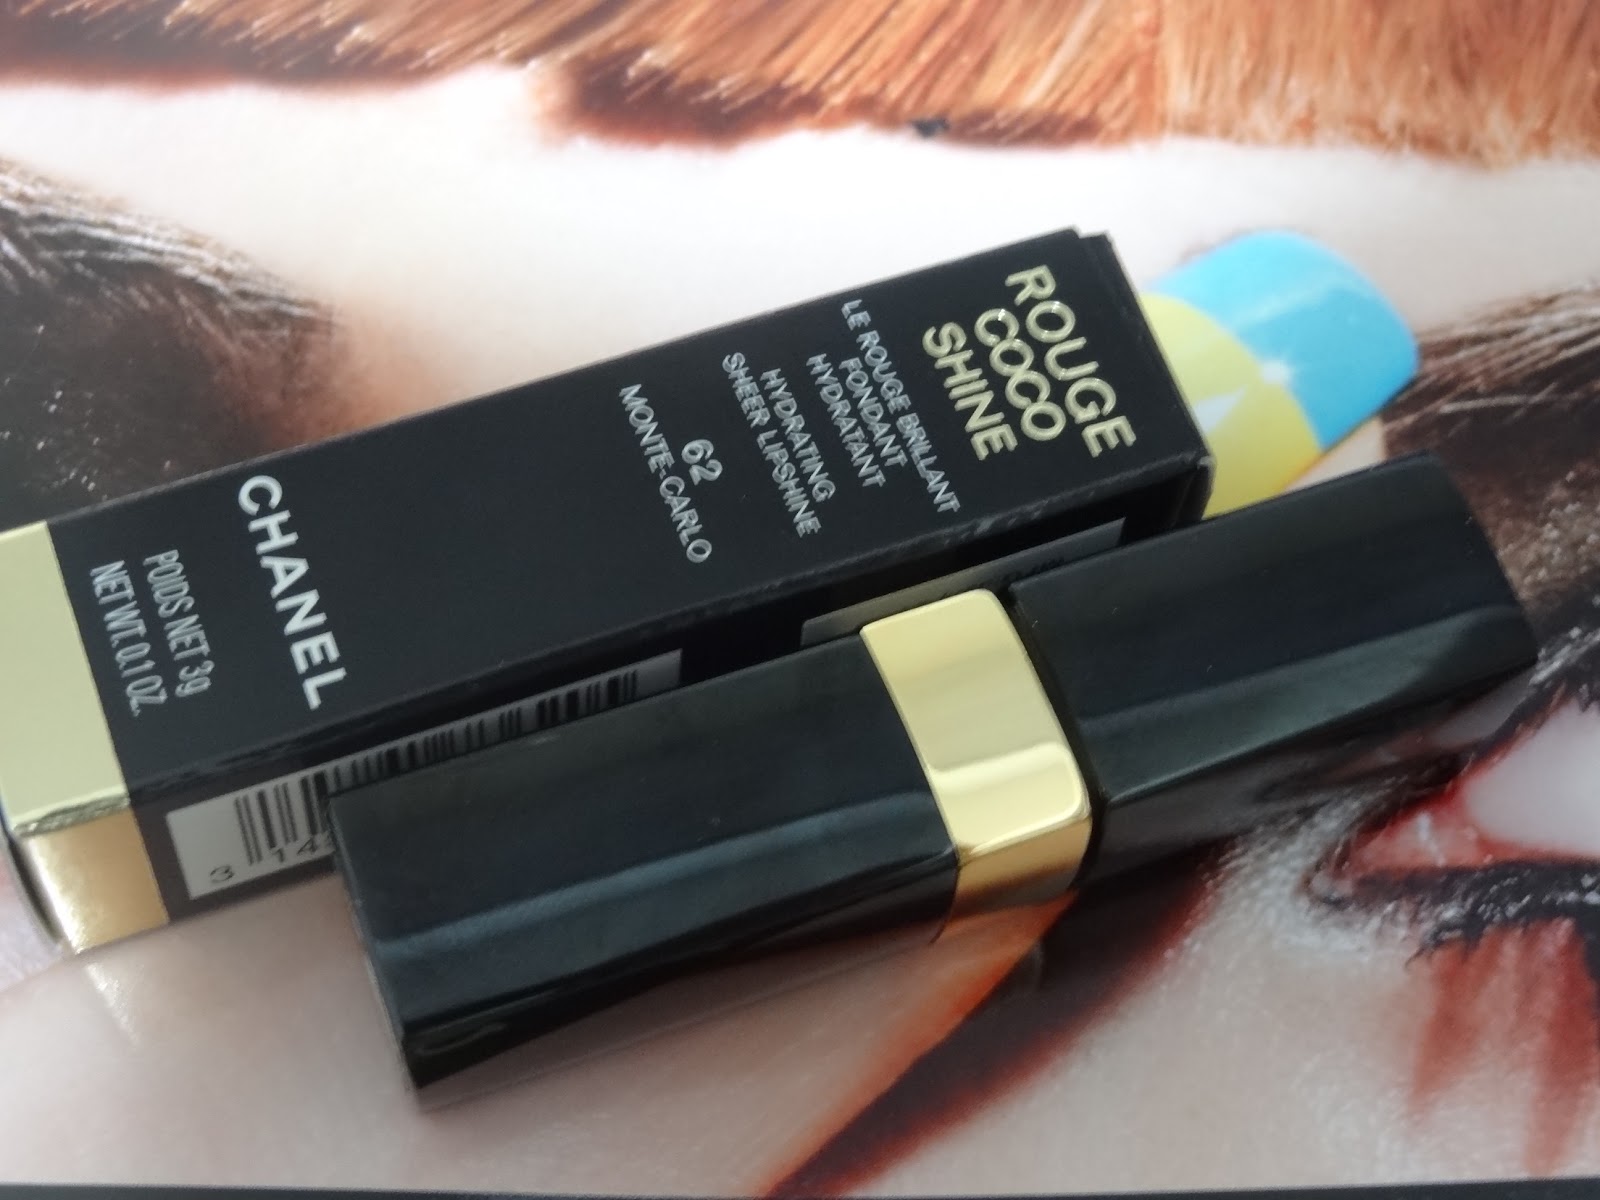 Positively Nice: Chanel Rouge Coco Shine in 62 Monte Carlo Review + FOTD